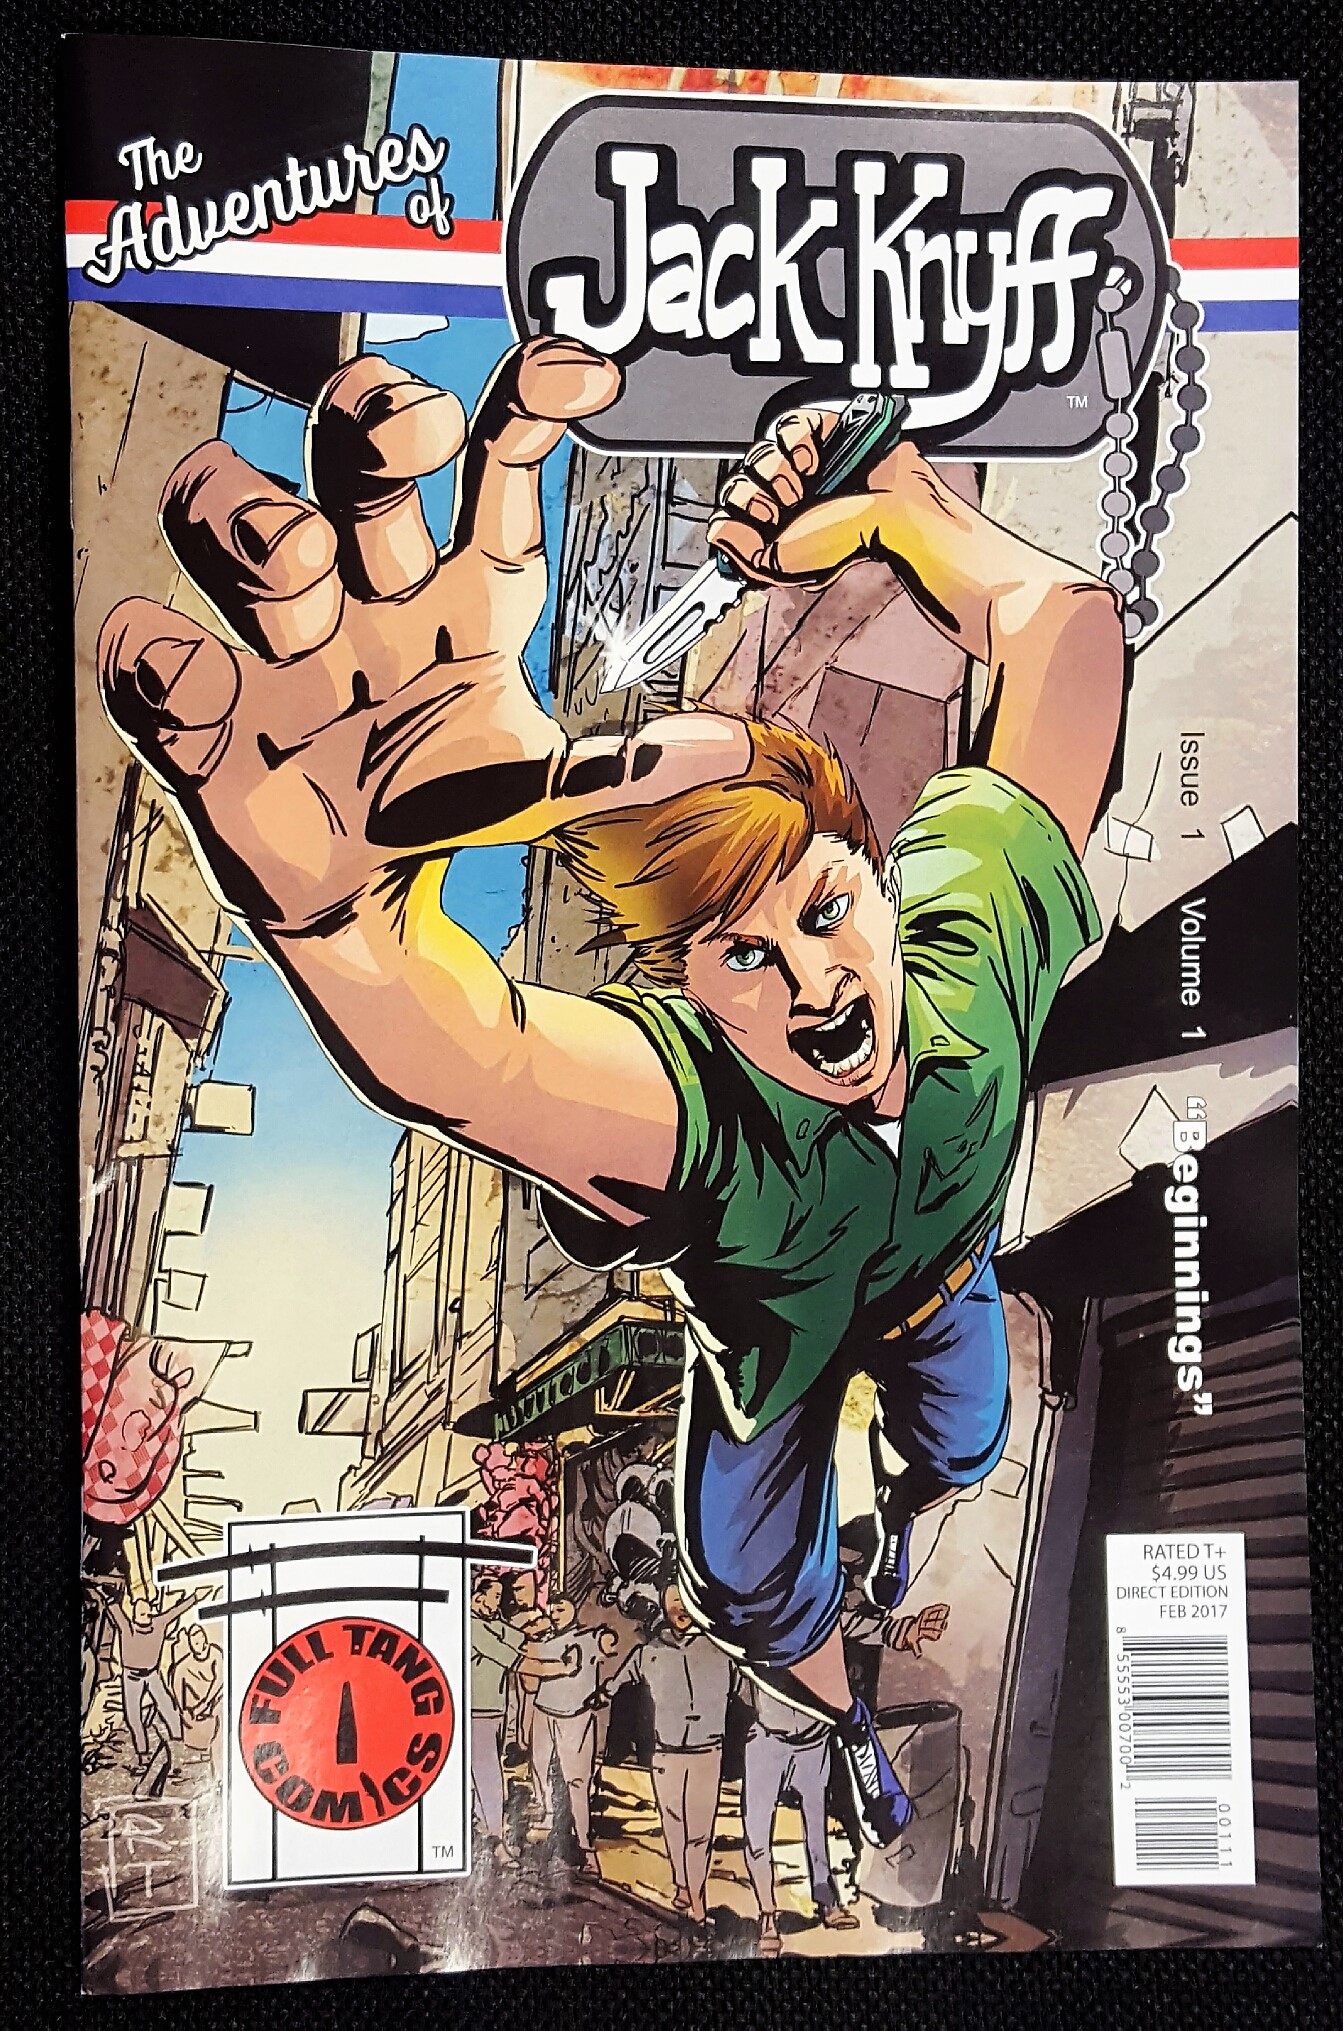 (Discontinued) Medford Comic 'The Adventures of Jack Knyff' Issue 1, Vol 1